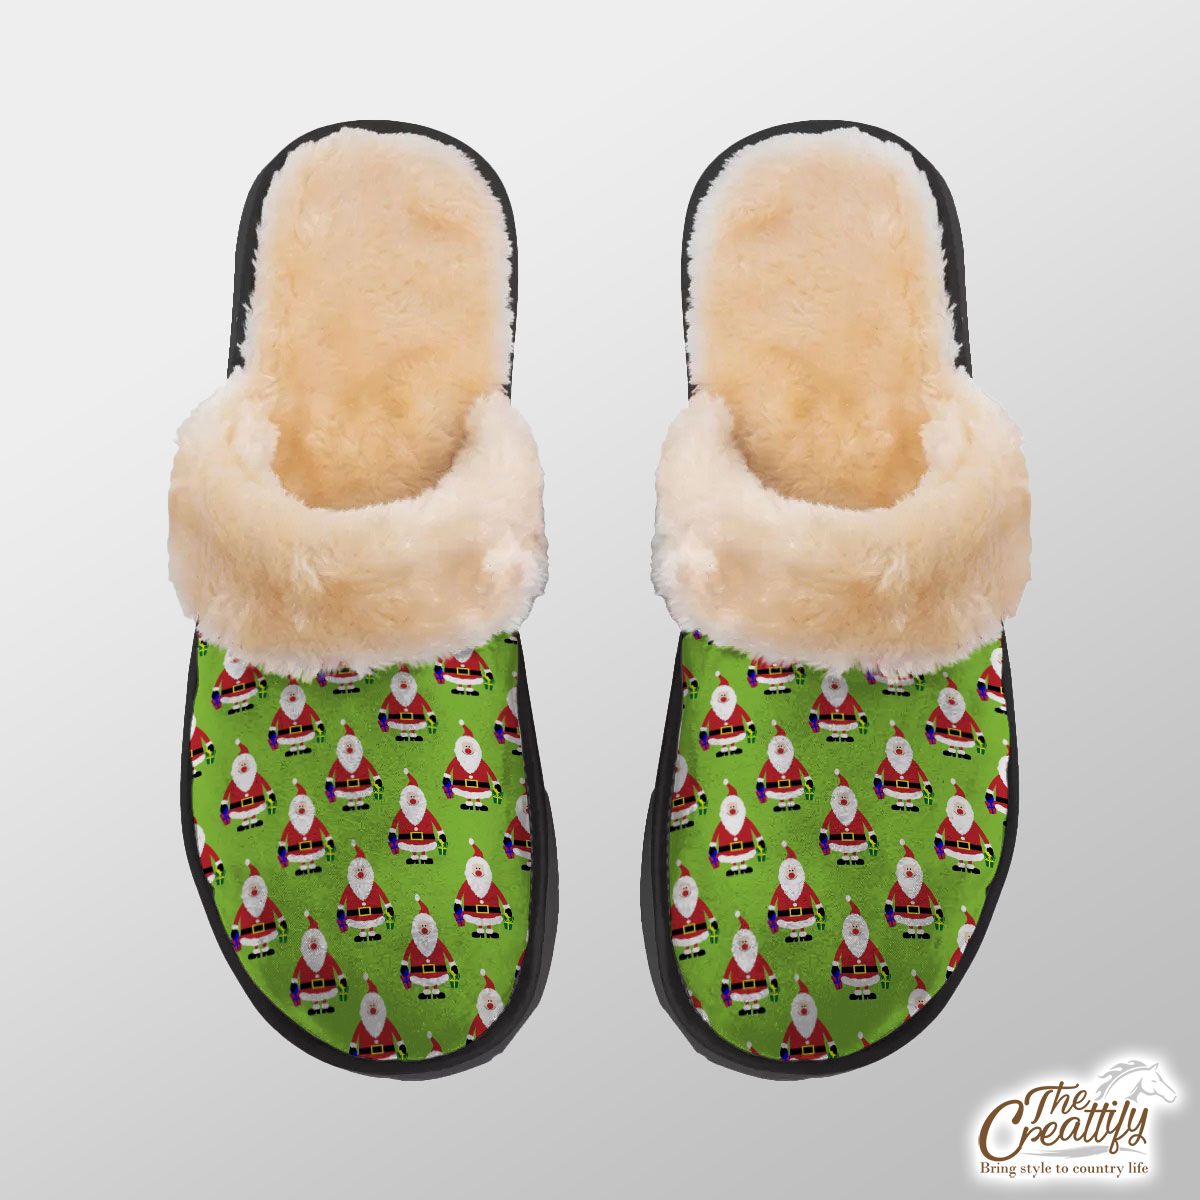 Santa Claus, Christmas Santa, Christmas Santa Claus Home Plush Slippers